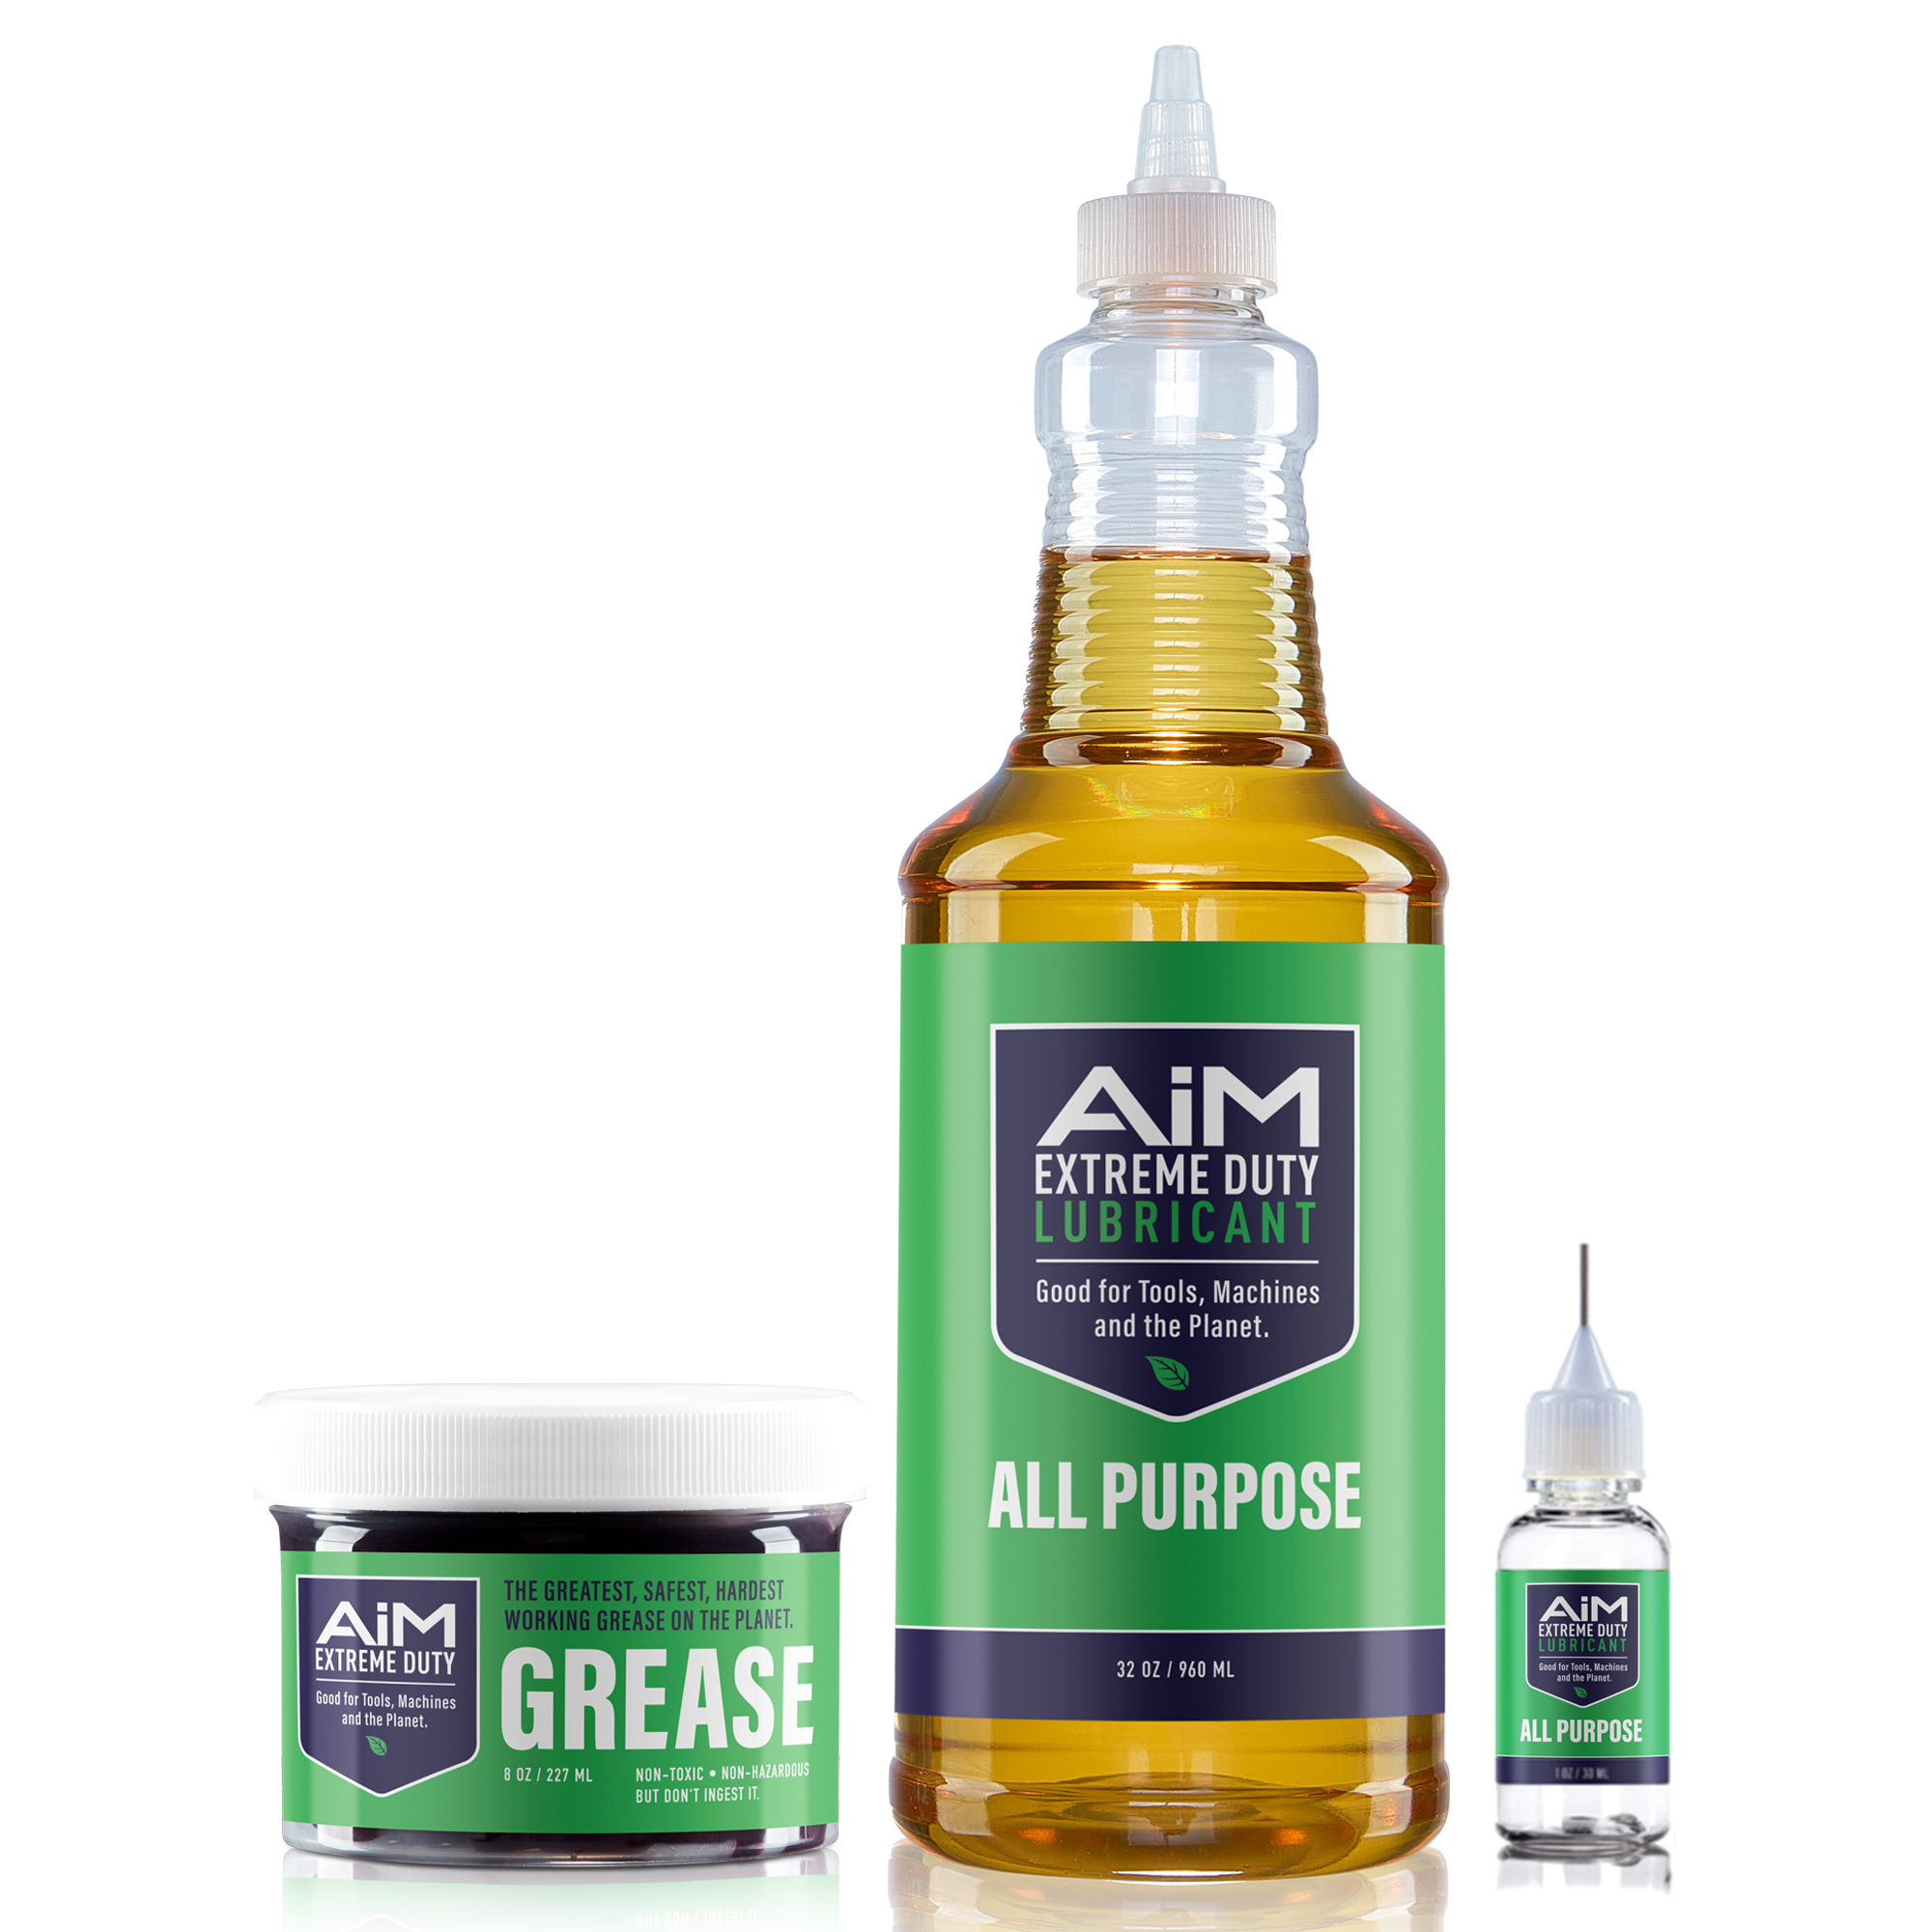 AiM Extreme Duty Lubricant | Exercise Equipment Lube | Large Kit | 32oz yorker/sprayer + 8 oz grease + precision bottle